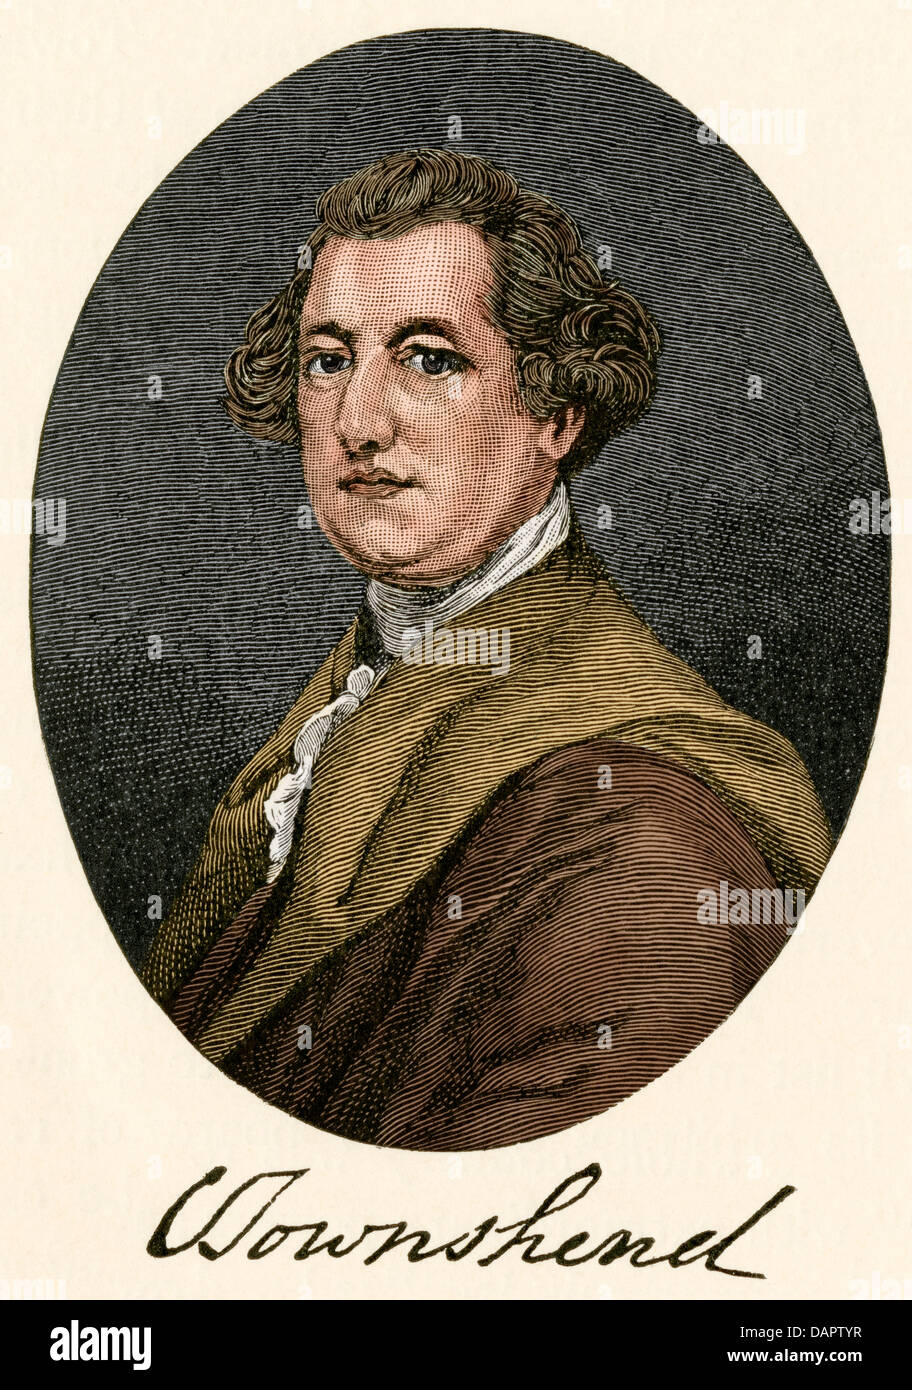 English statesman Charles Townshend, who introduced the tea tax on colonies. Hand-colored woodcut Stock Photo